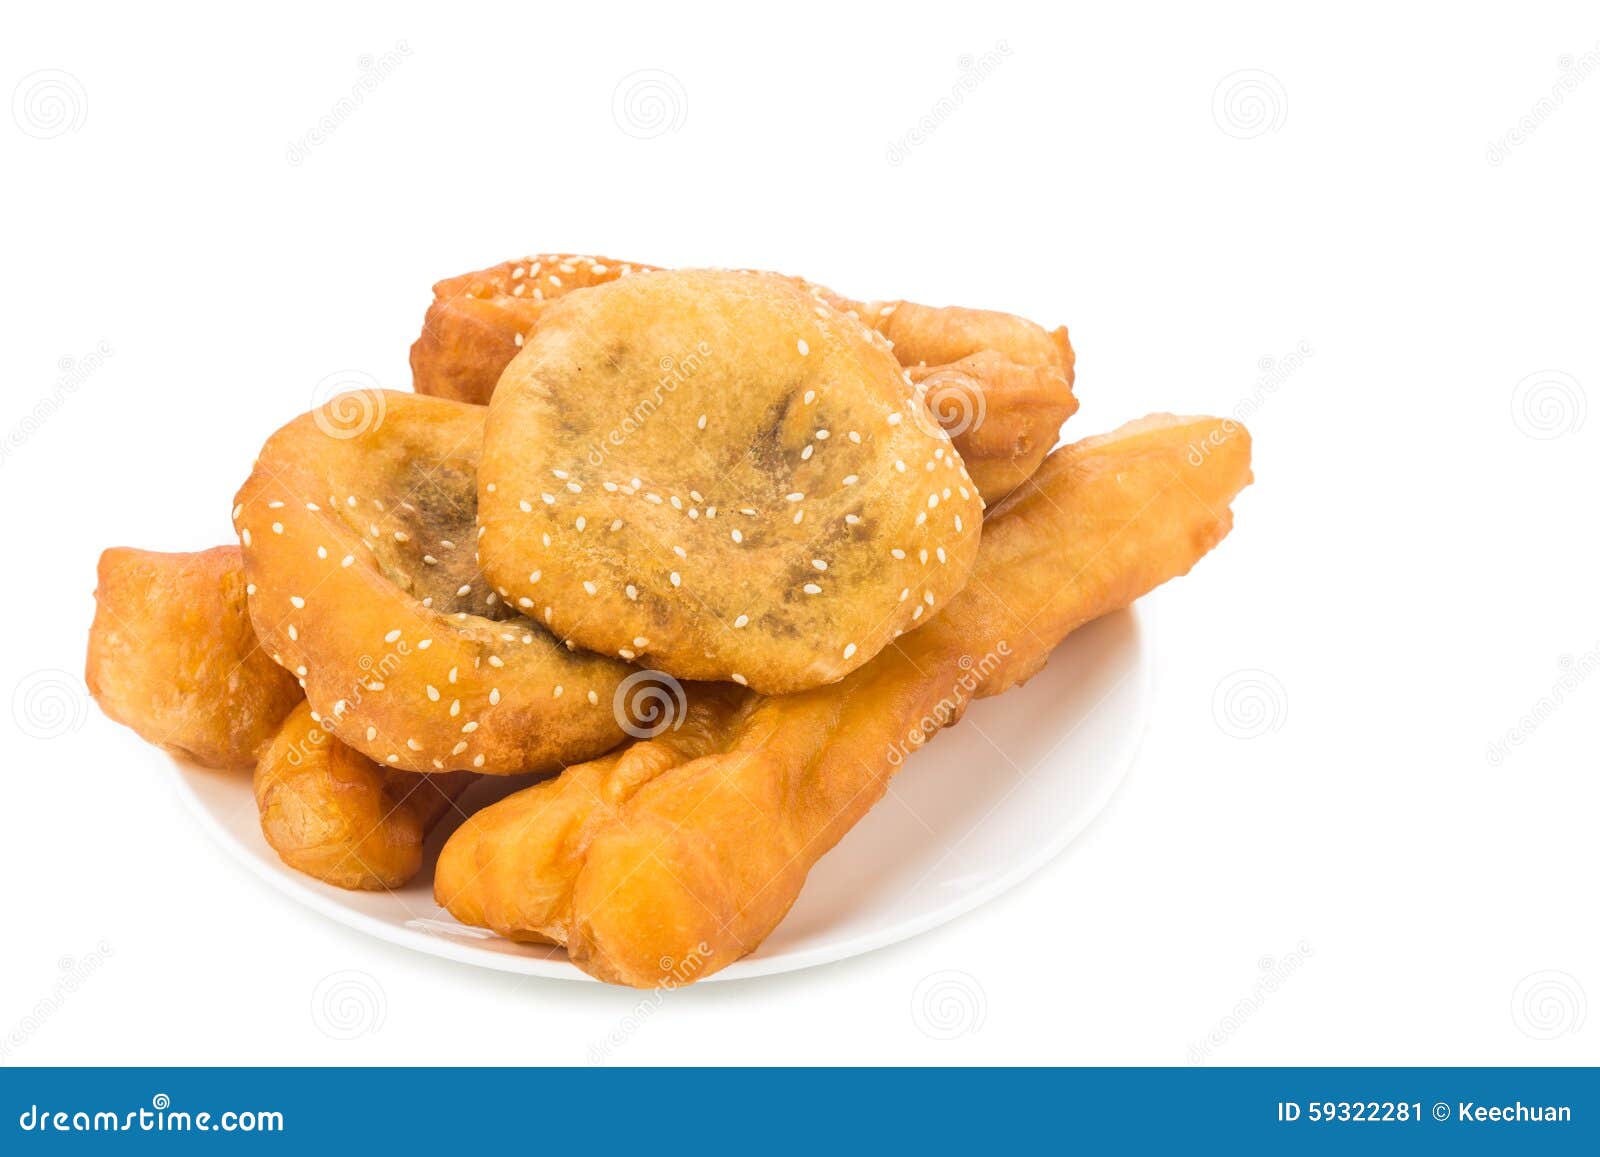 combination serving of delicious you tiao, han chim peng and ma